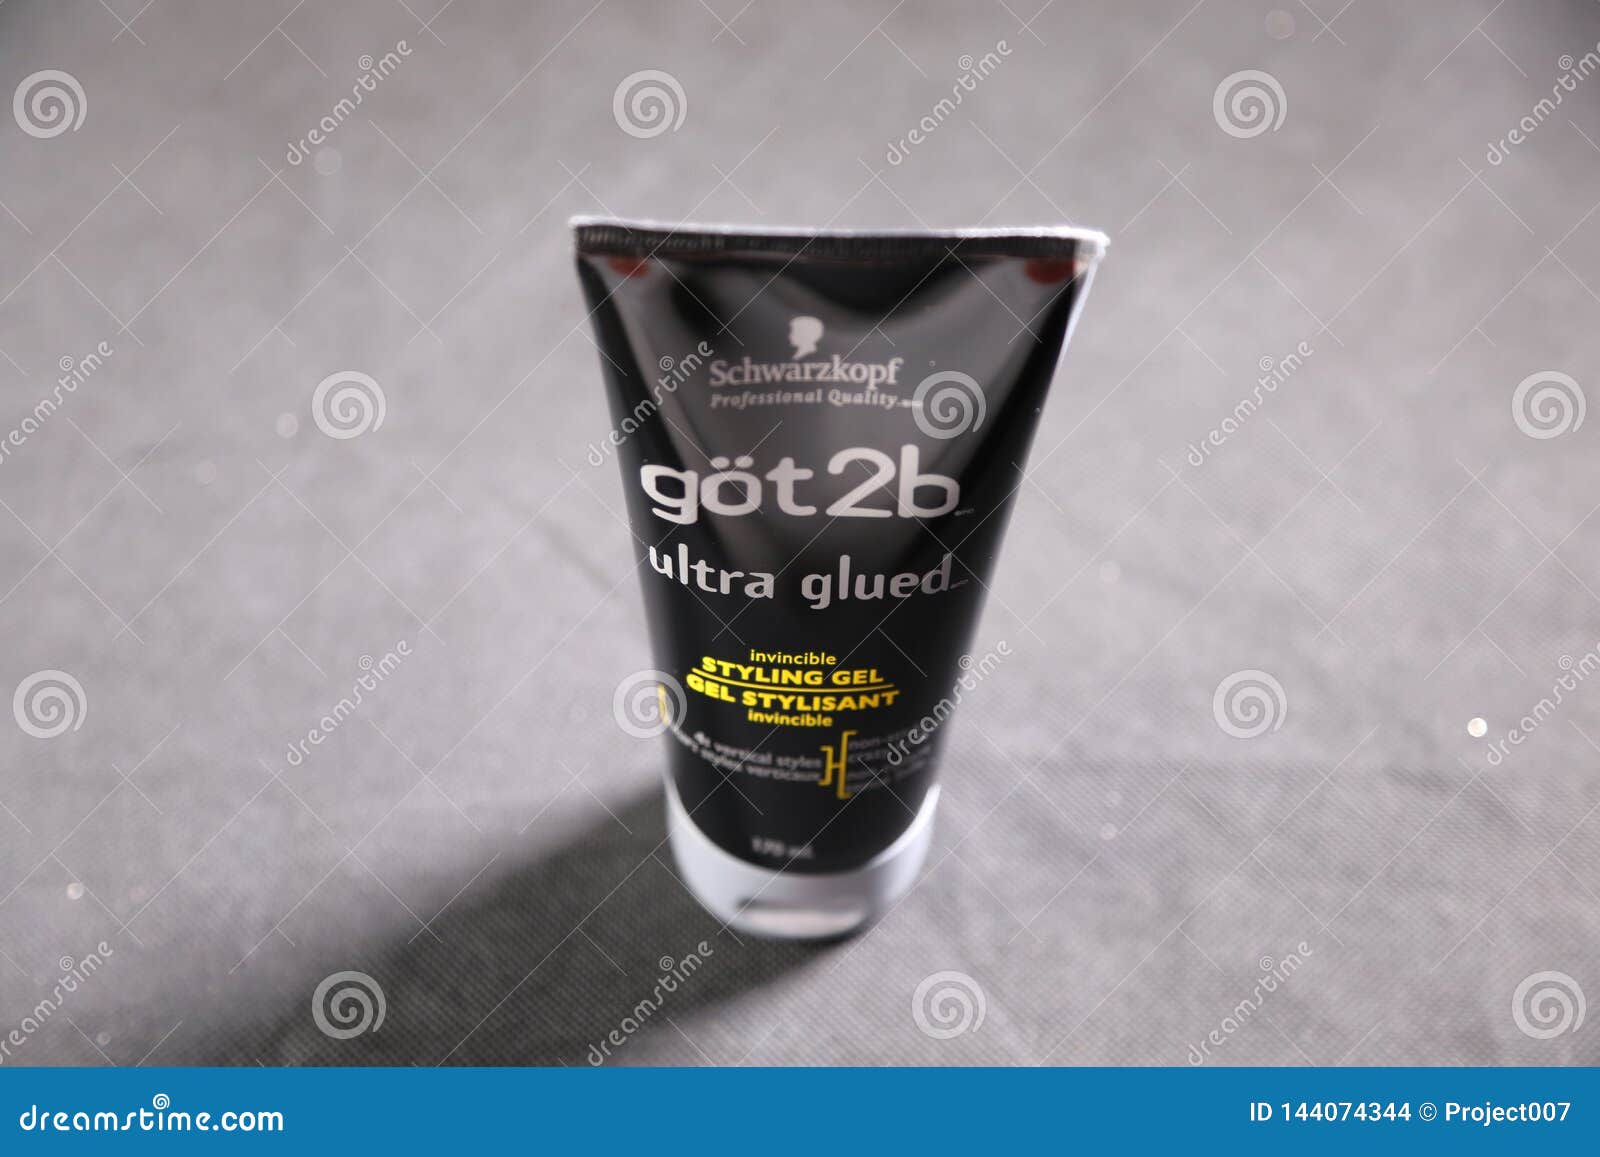 Schwarzkopf- Hair Gel Brand for Editorial News Story Cover about  Manufacturing of Gel for Hair Styling Editorial Stock Image - Image of  got2b, covers: 144074344